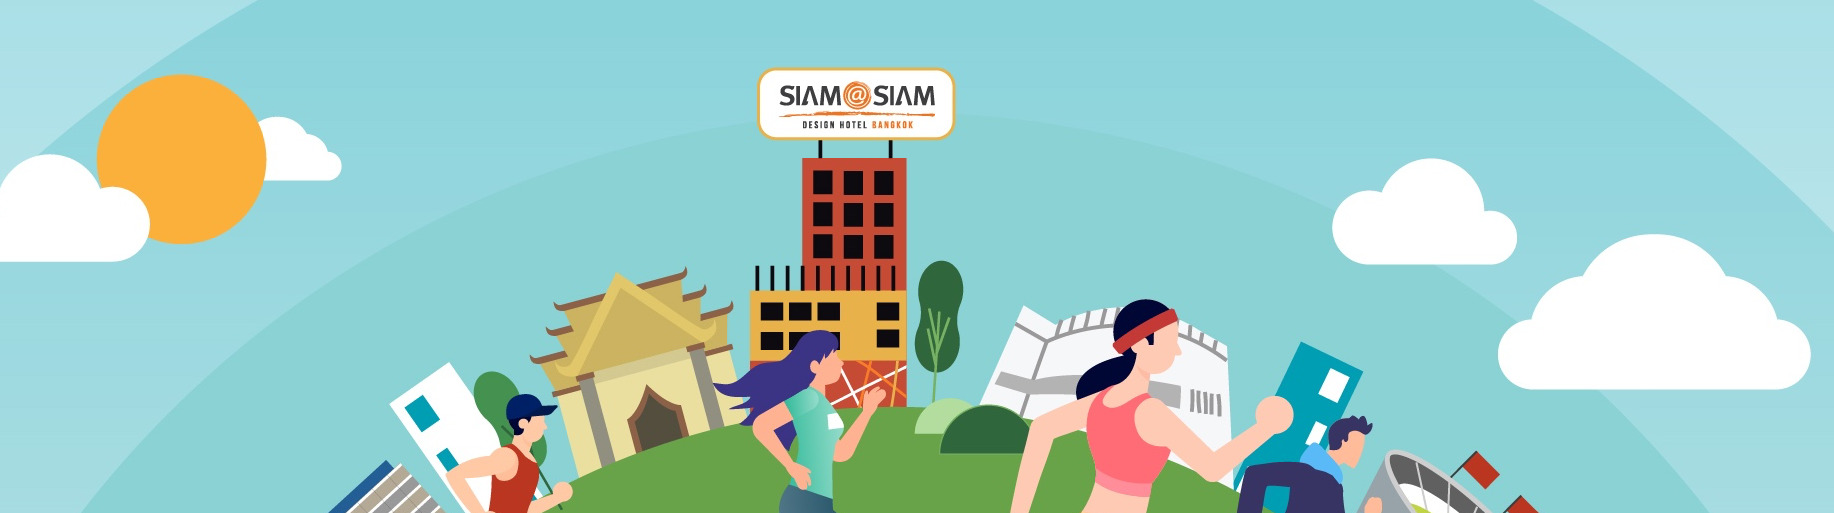 Running Routes Around Siam to Keep Fit (And Explore Some Awesome Sights)